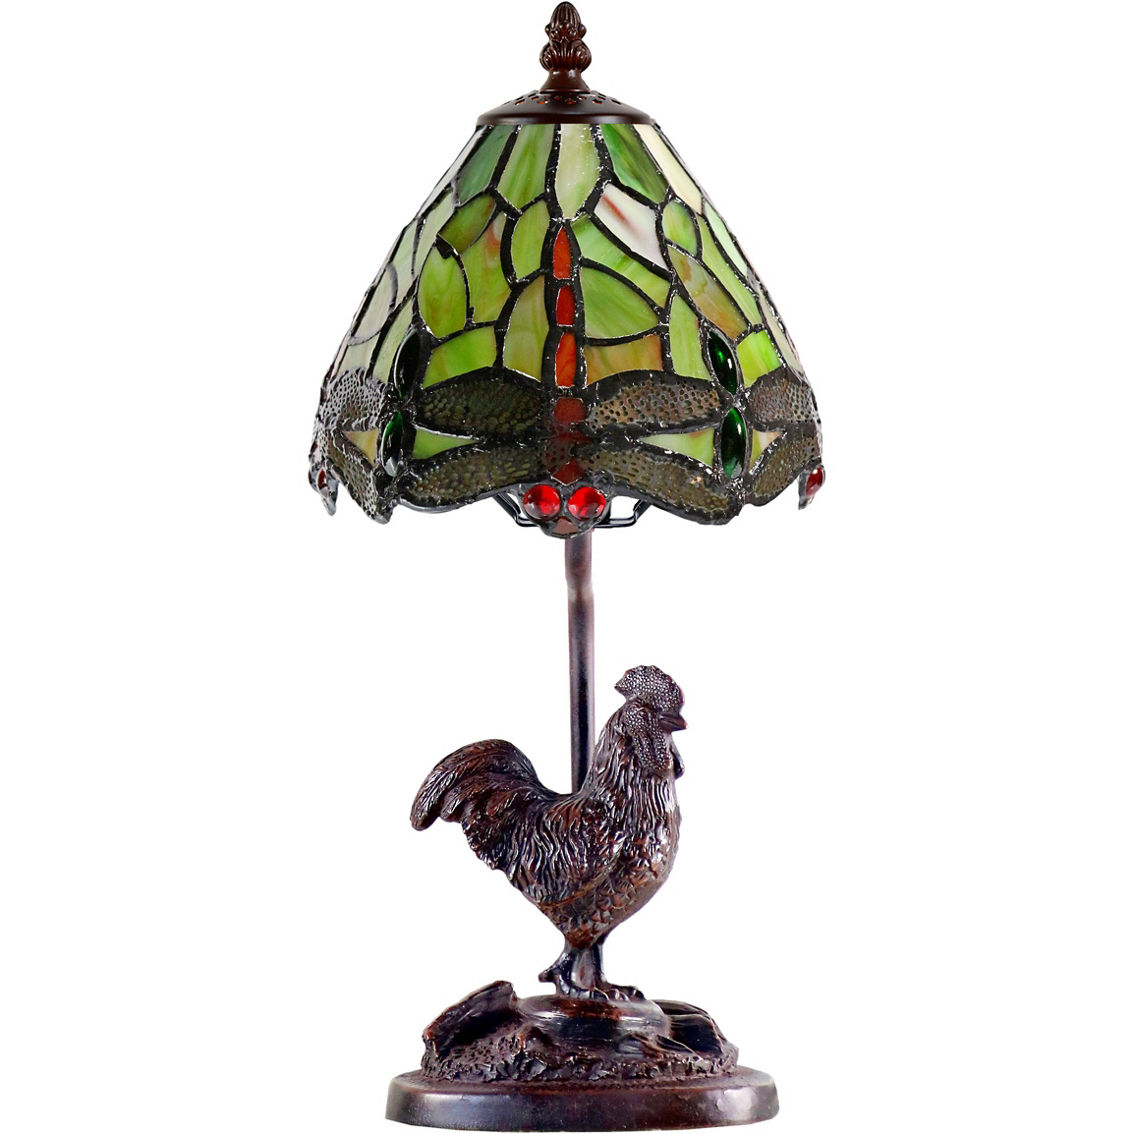 Dale Tiffany 16 in. Tall Rooster Sculpture Accent Lamp - Image 2 of 4